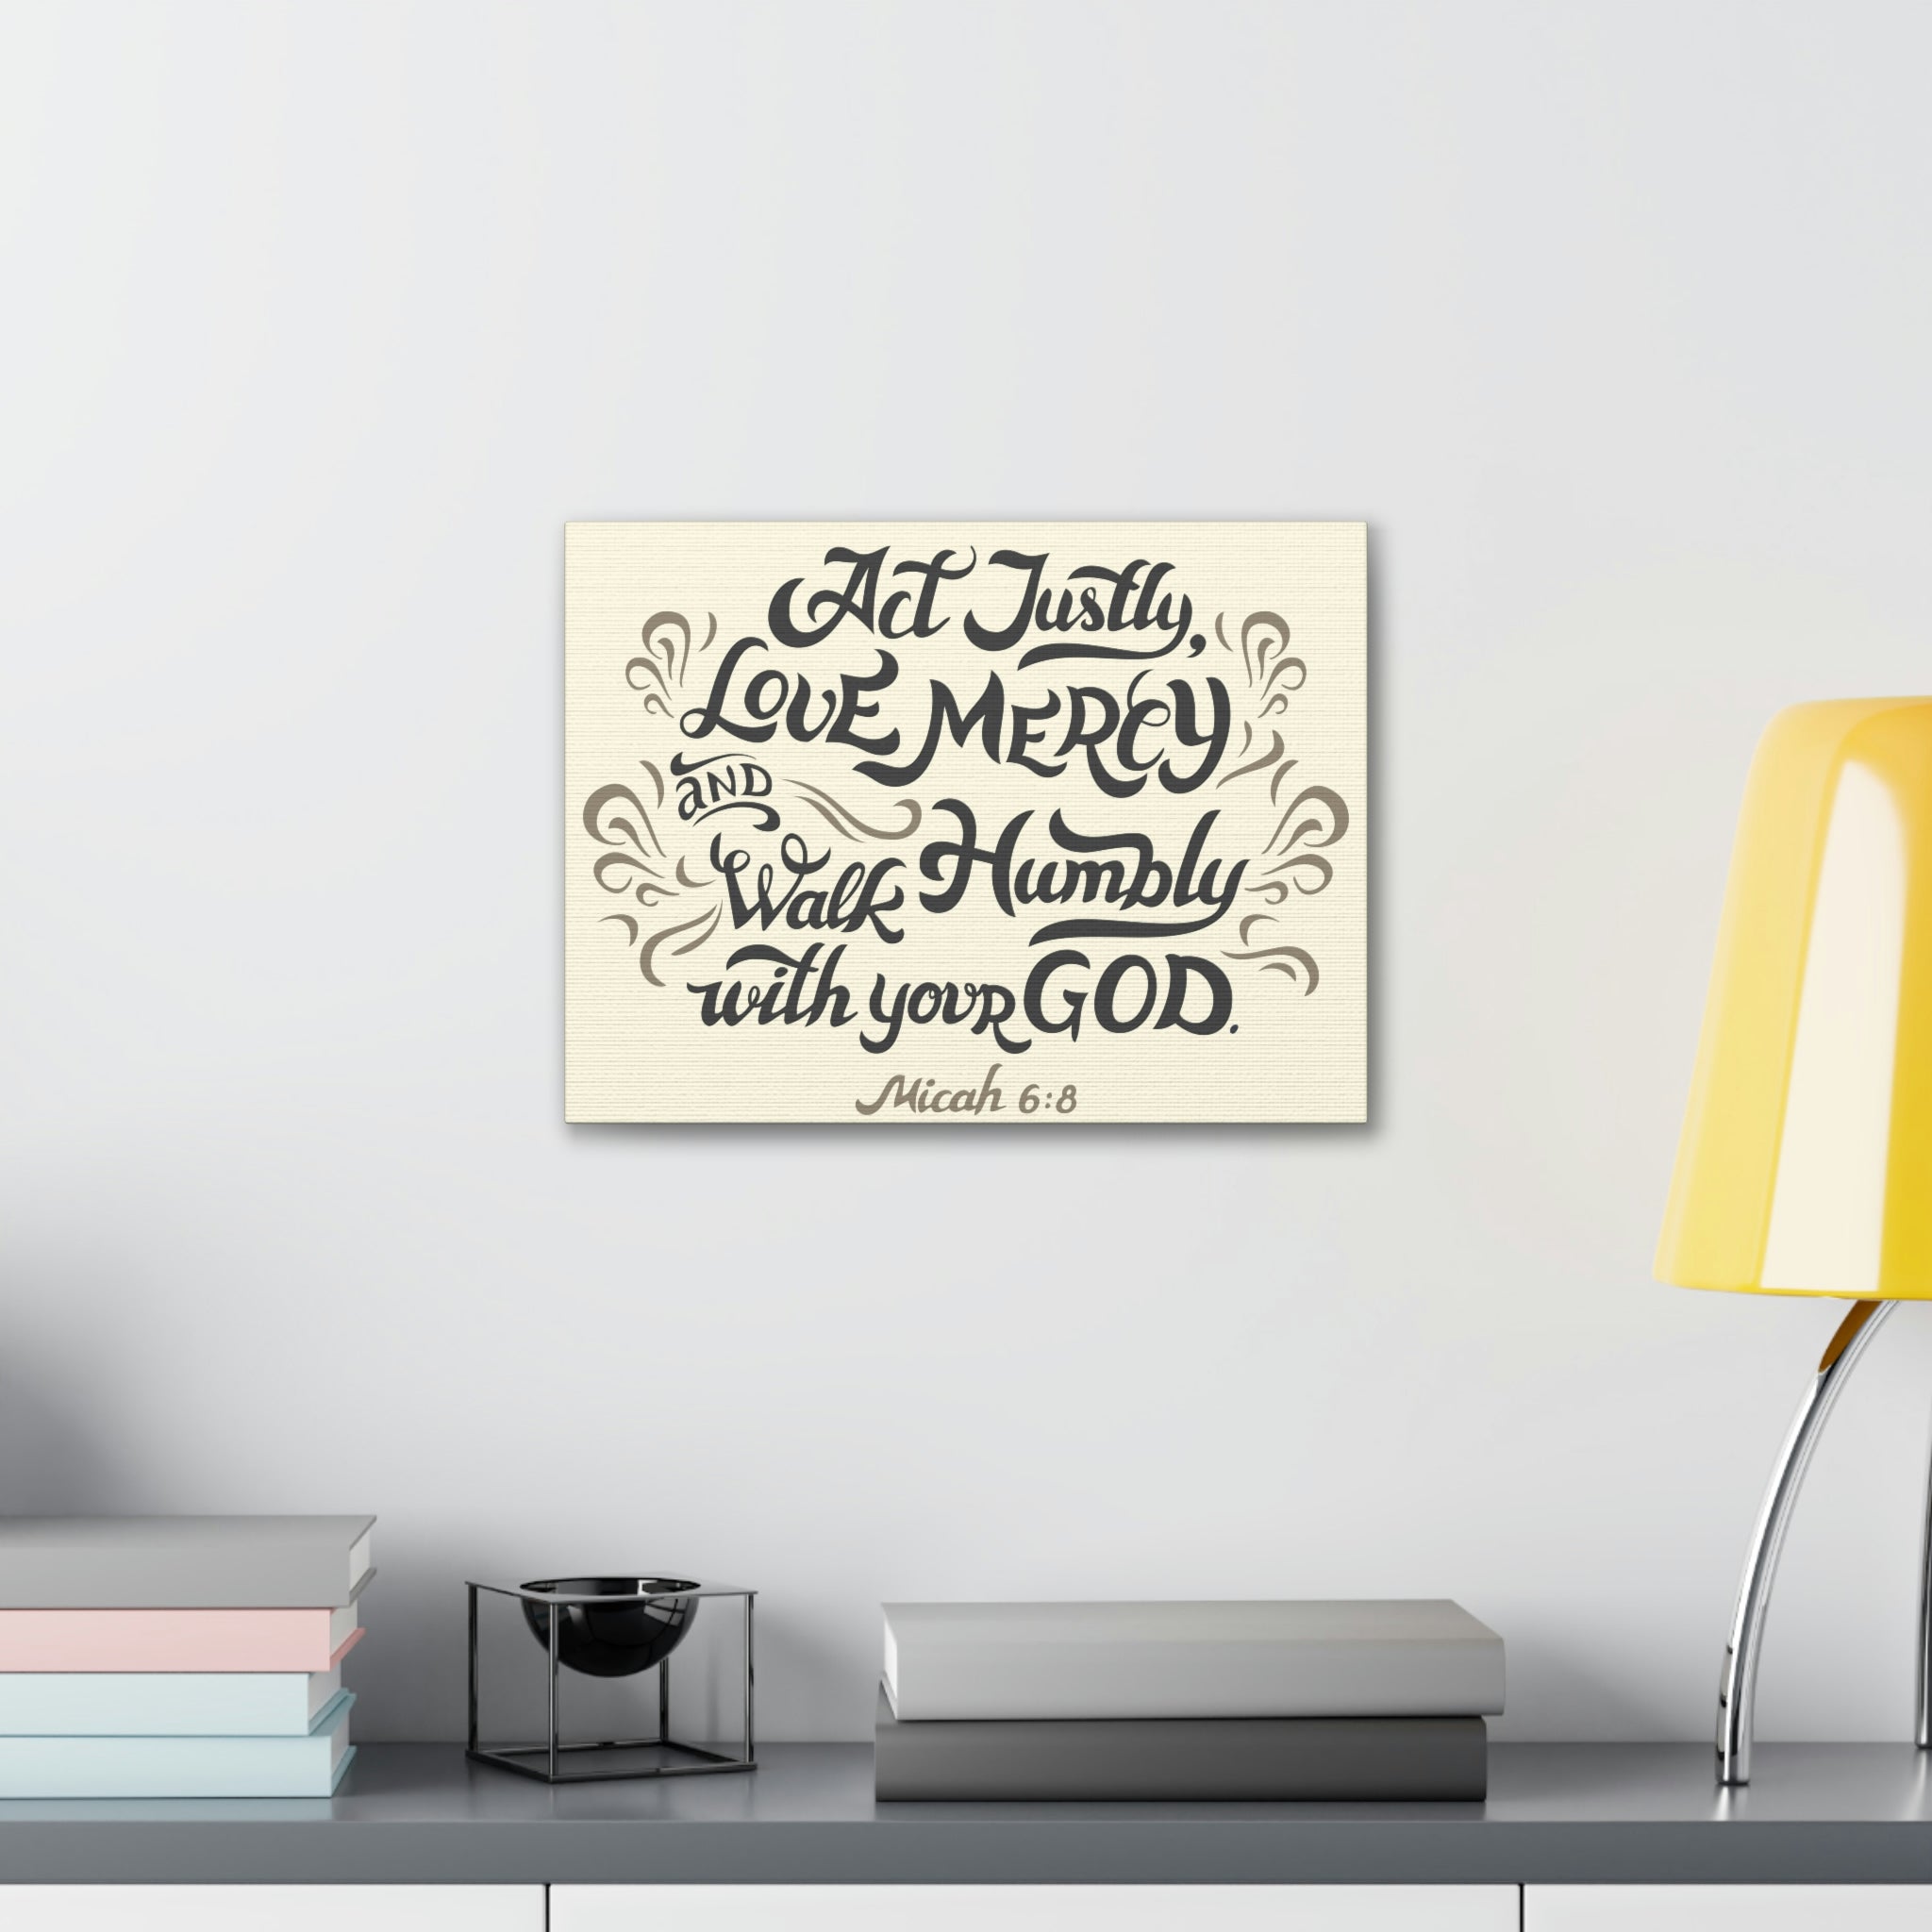 Do justly, Kids Bible quote, Scripture quote, Kids Bible verse wall art, Micah 6:8 Art Board Print for Sale by ashish845